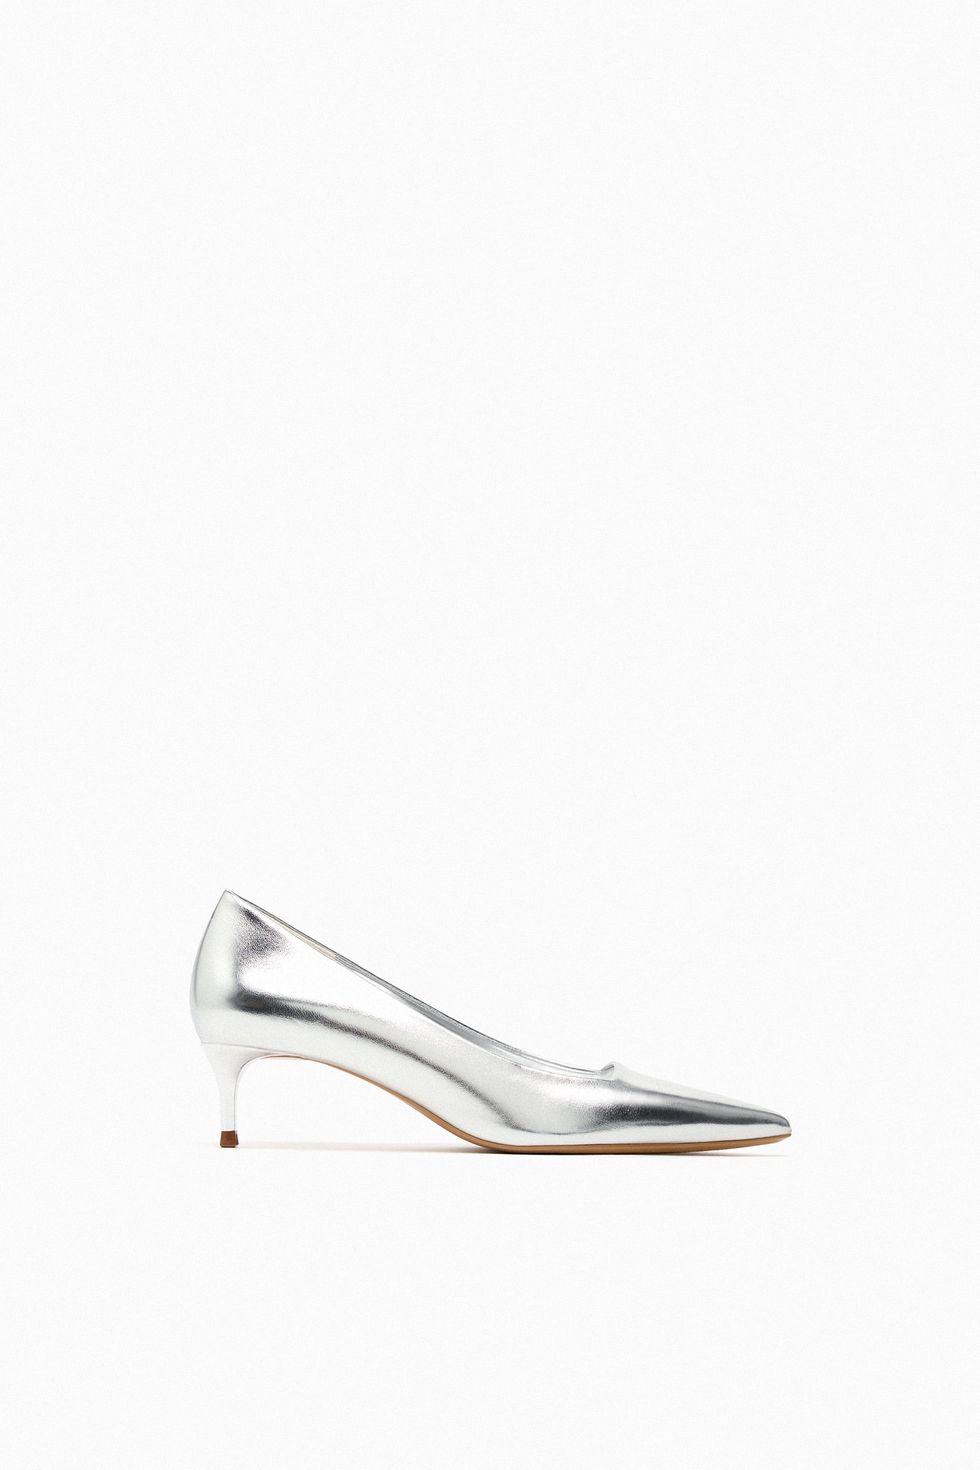 a white and gold shoe